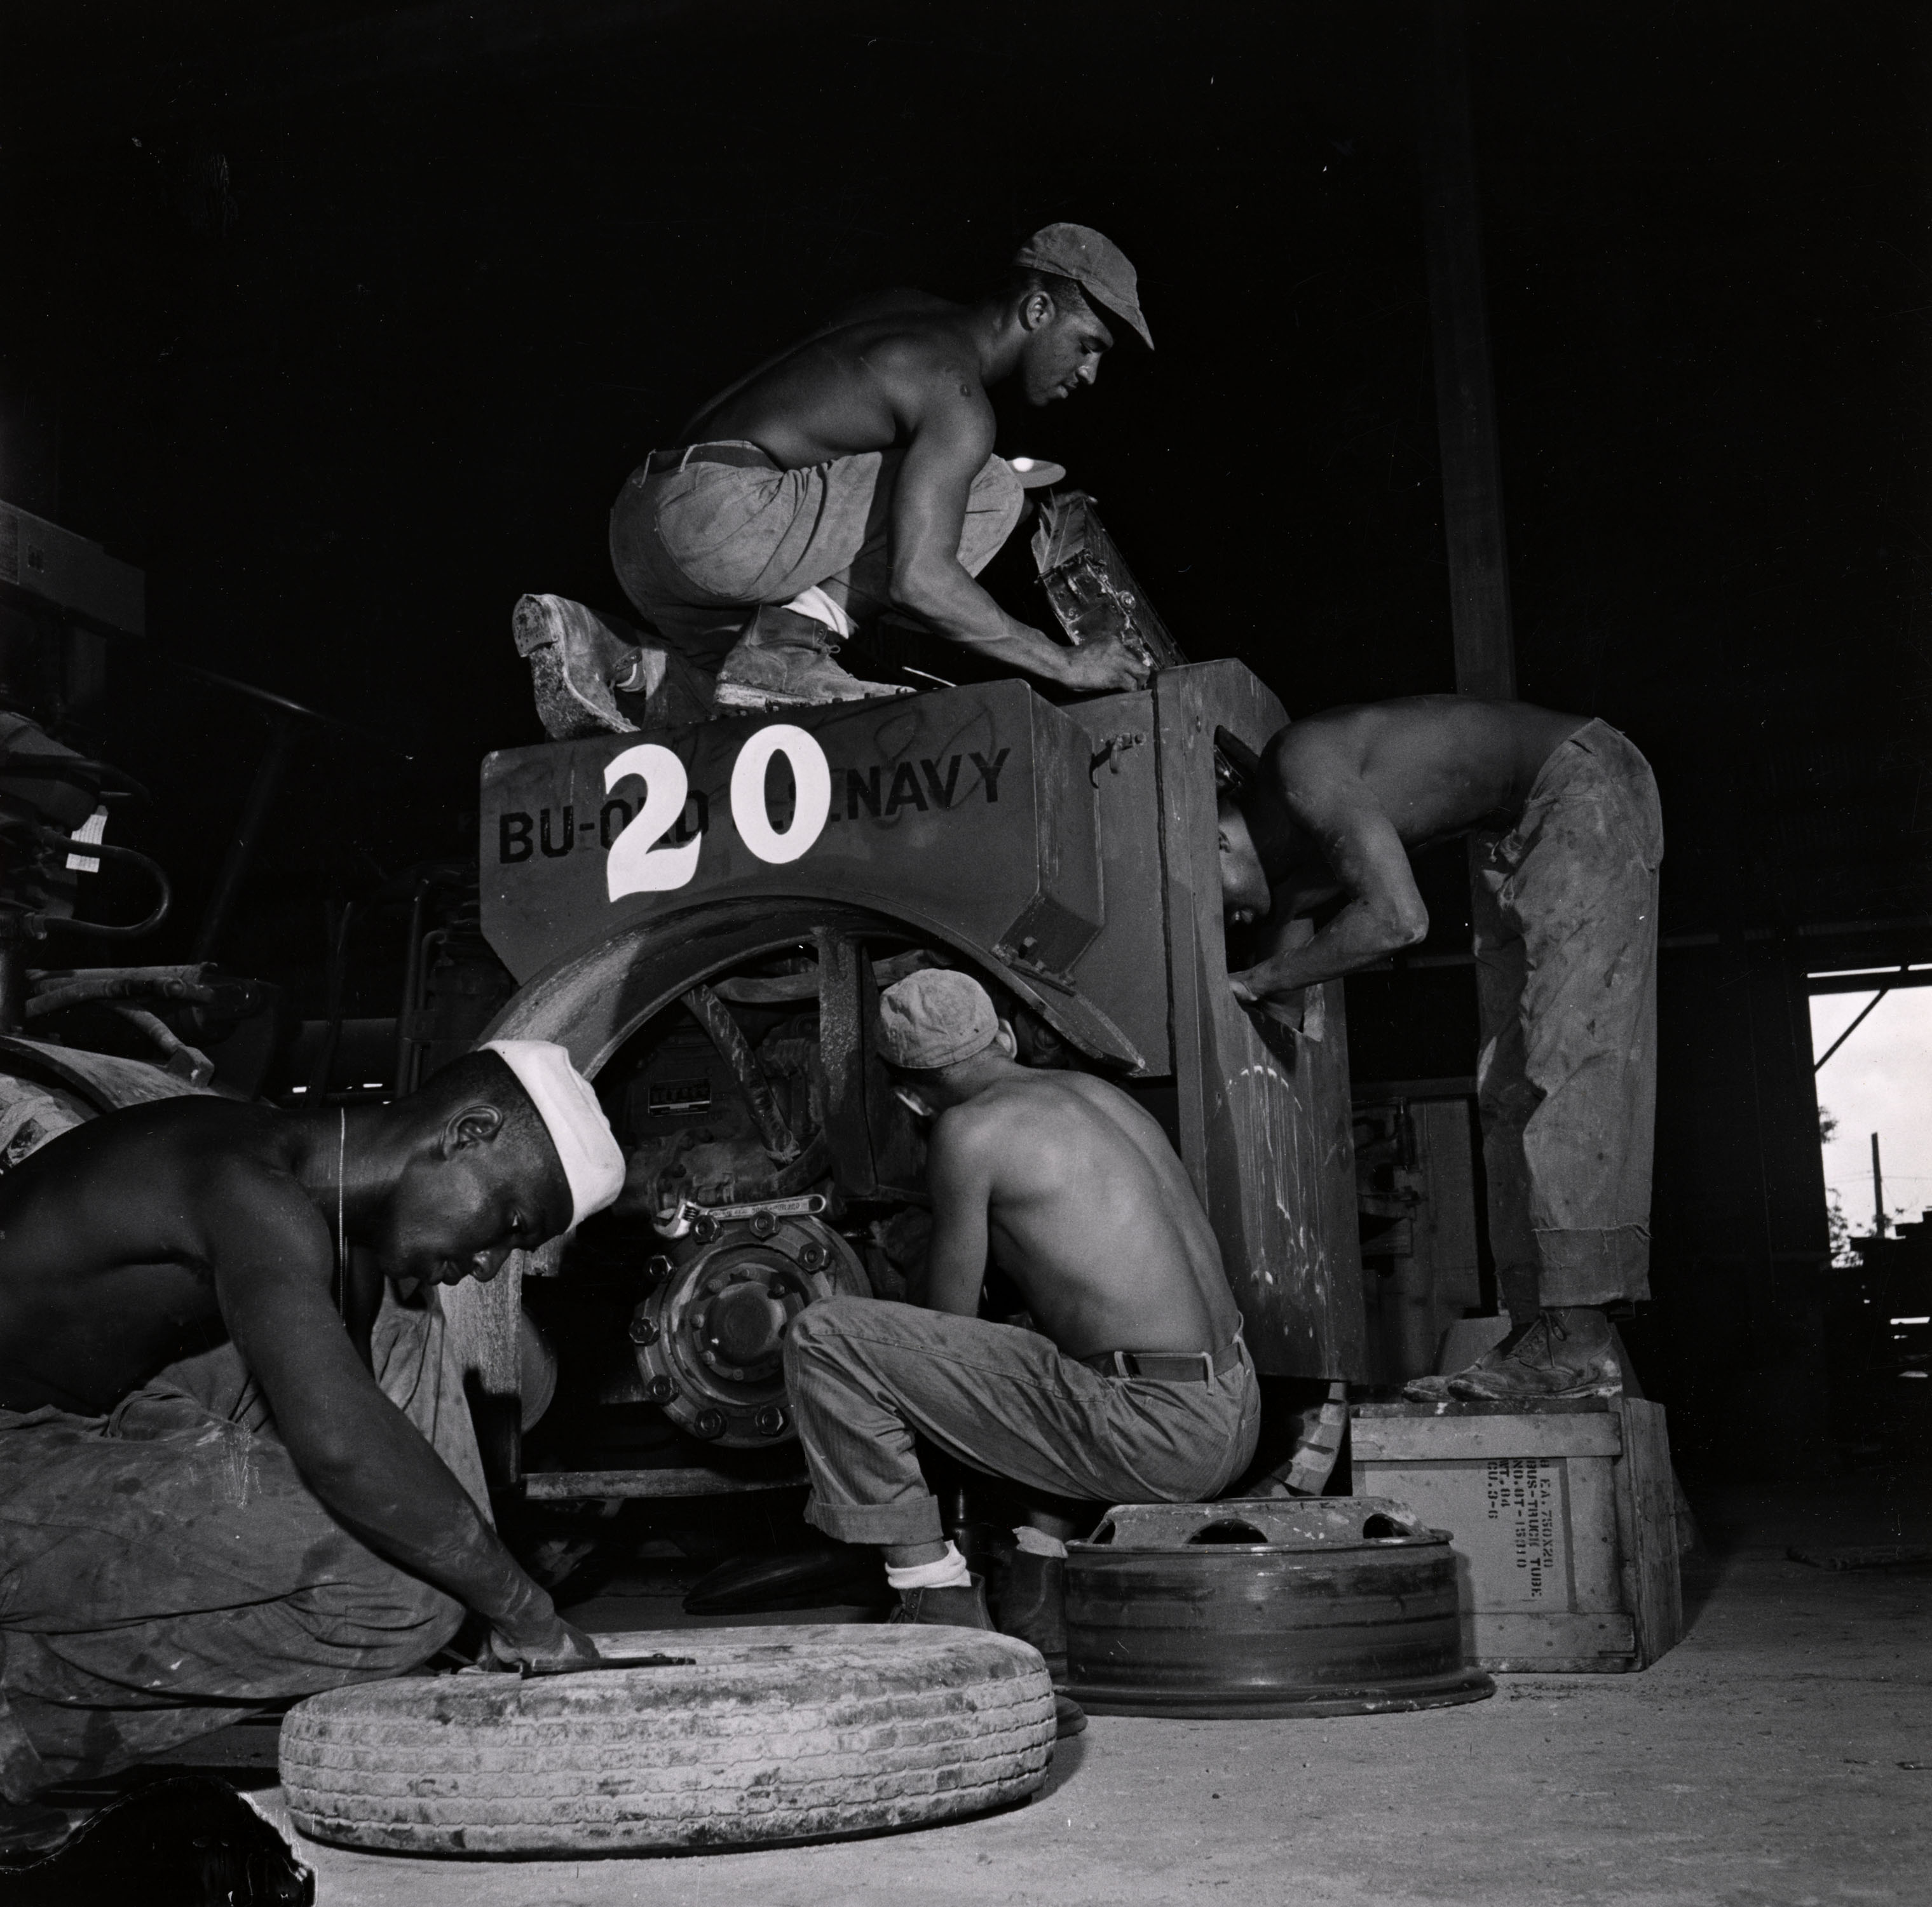 Sailors assigned to work as laborers at the US Naval Supply Depot on Guam. (Wayne Miller—Magnum Photos)